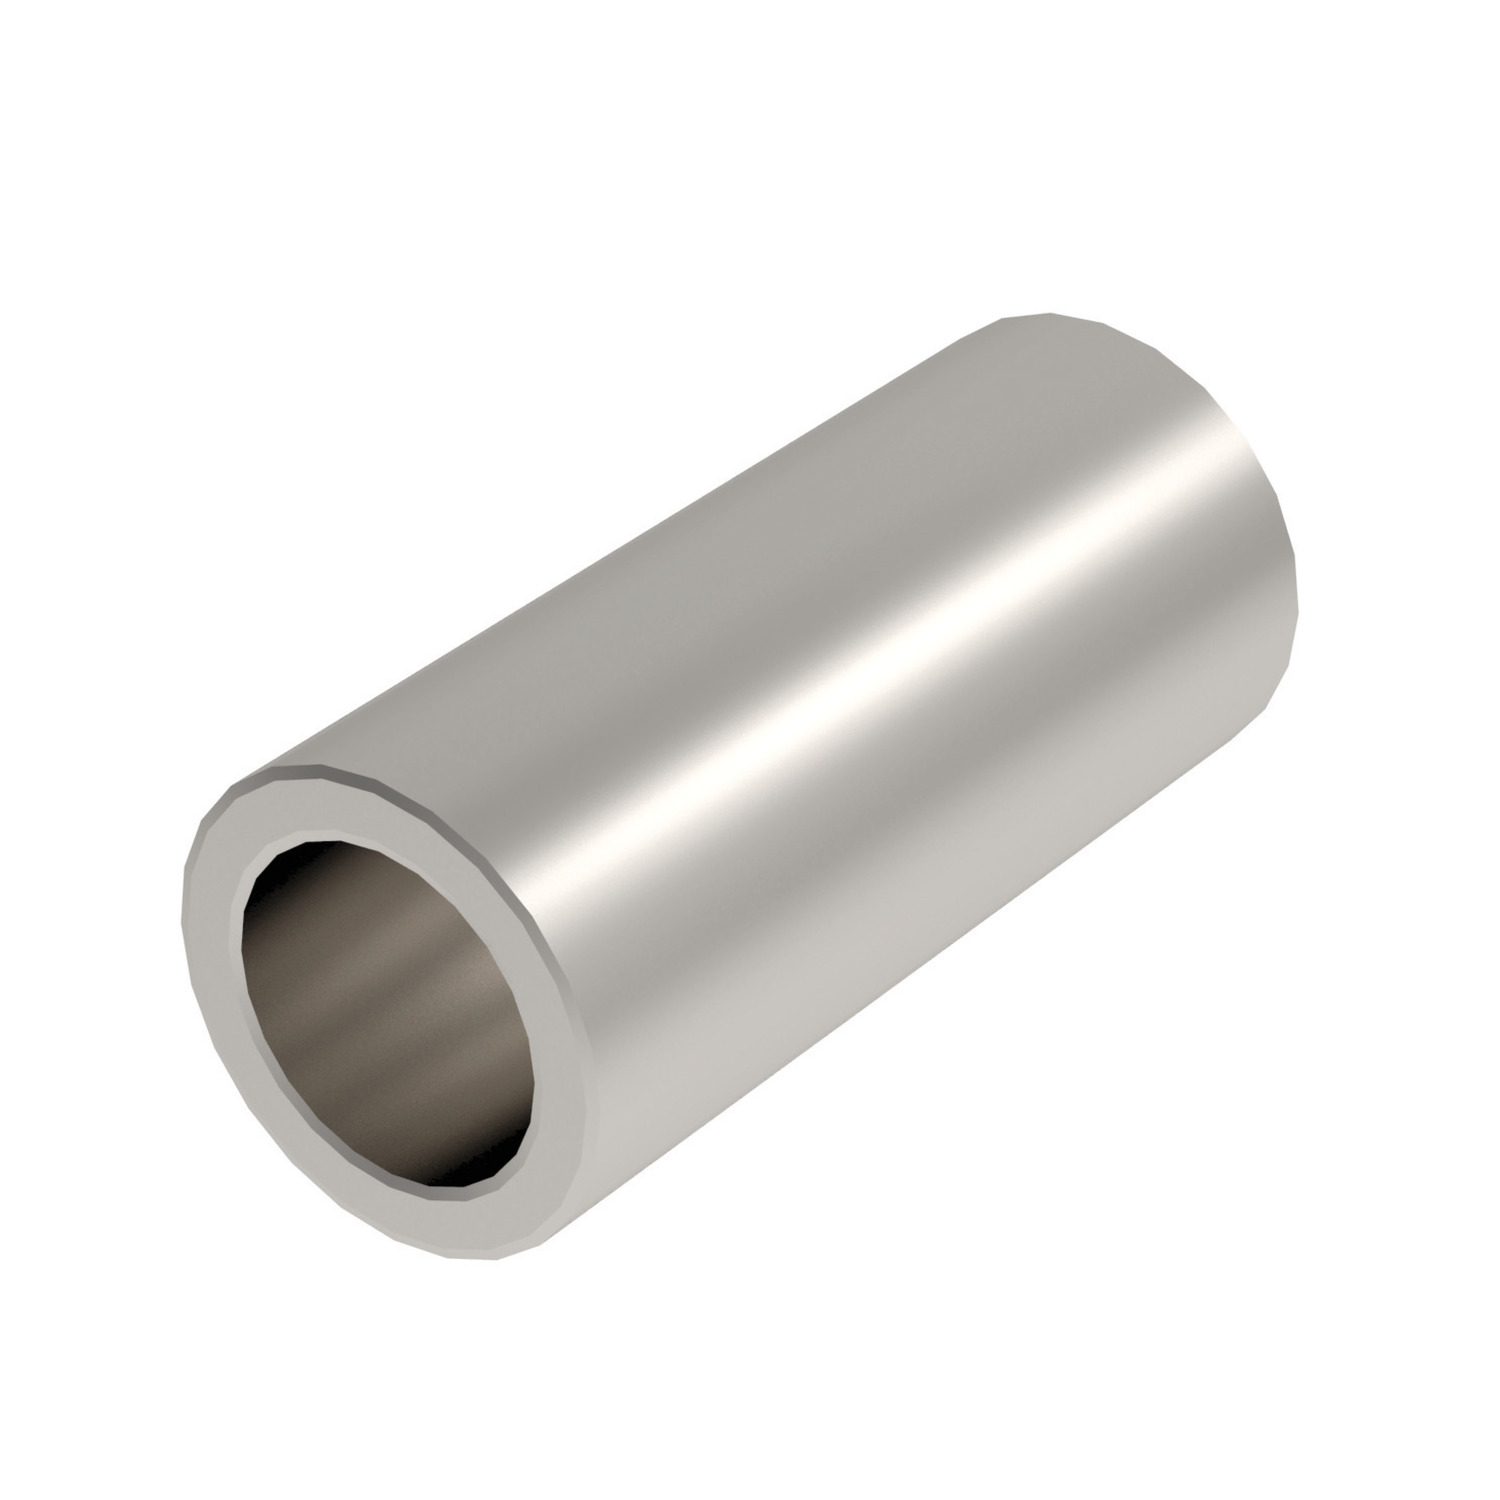 Product P0065.A2, Stainless Clearance Spacers A2 stainless / 